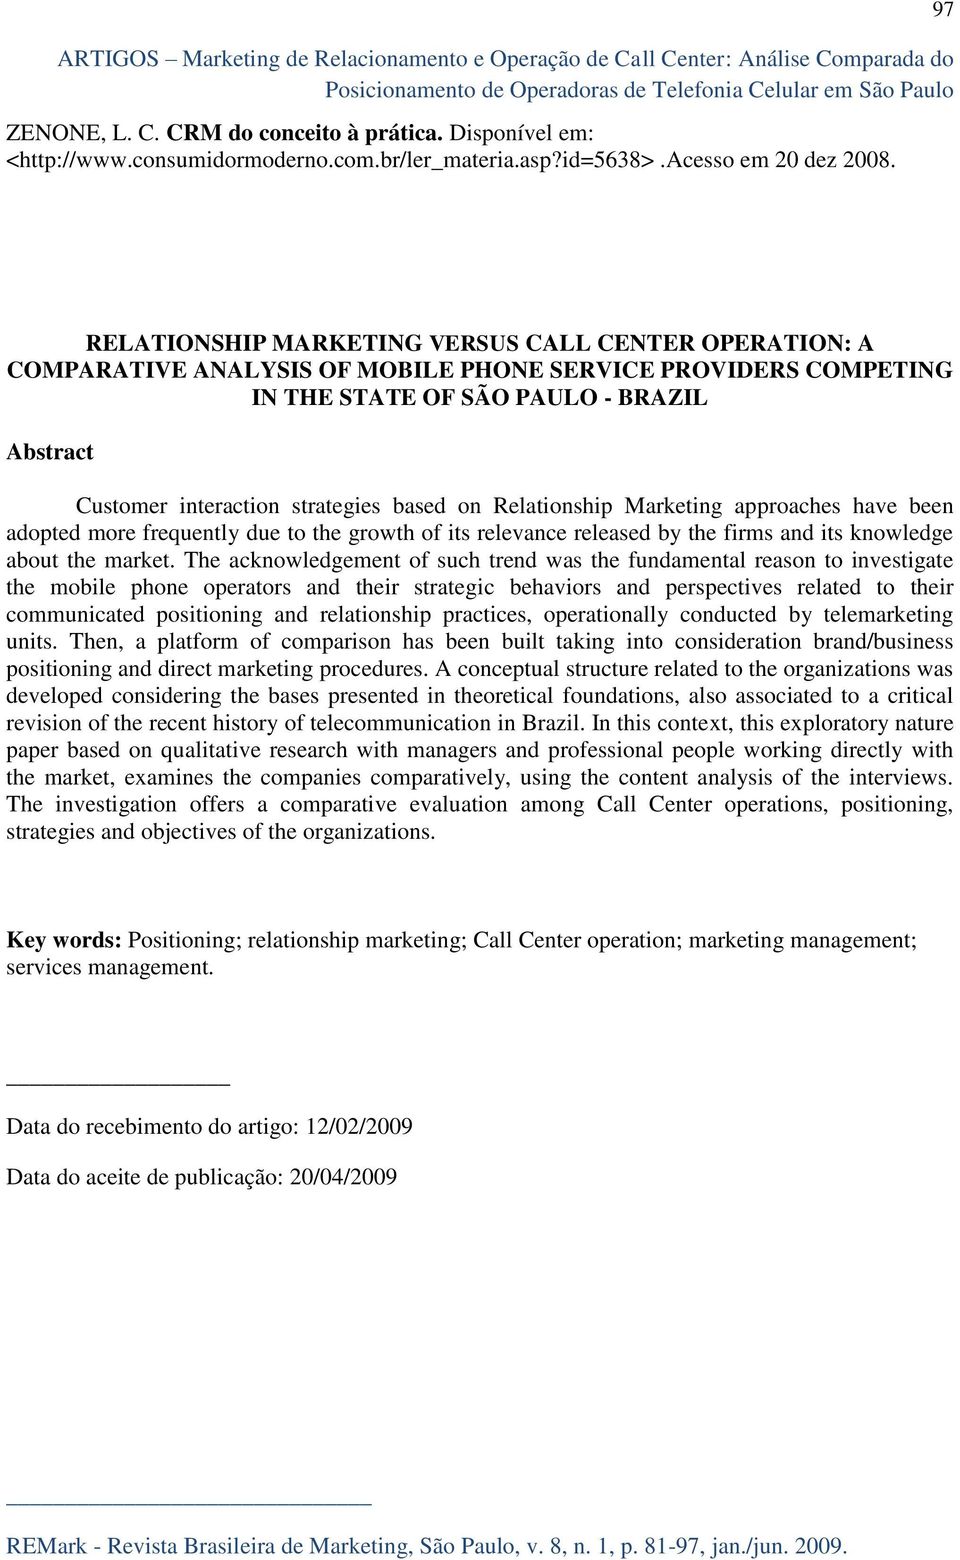 RELATIONSHIP MARKETING VERSUS CALL CENTER OPERATION: A COMPARATIVE ANALYSIS OF MOBILE PHONE SERVICE PROVIDERS COMPETING IN THE STATE OF SÃO PAULO - BRAZIL Abstract Customer interaction strategies